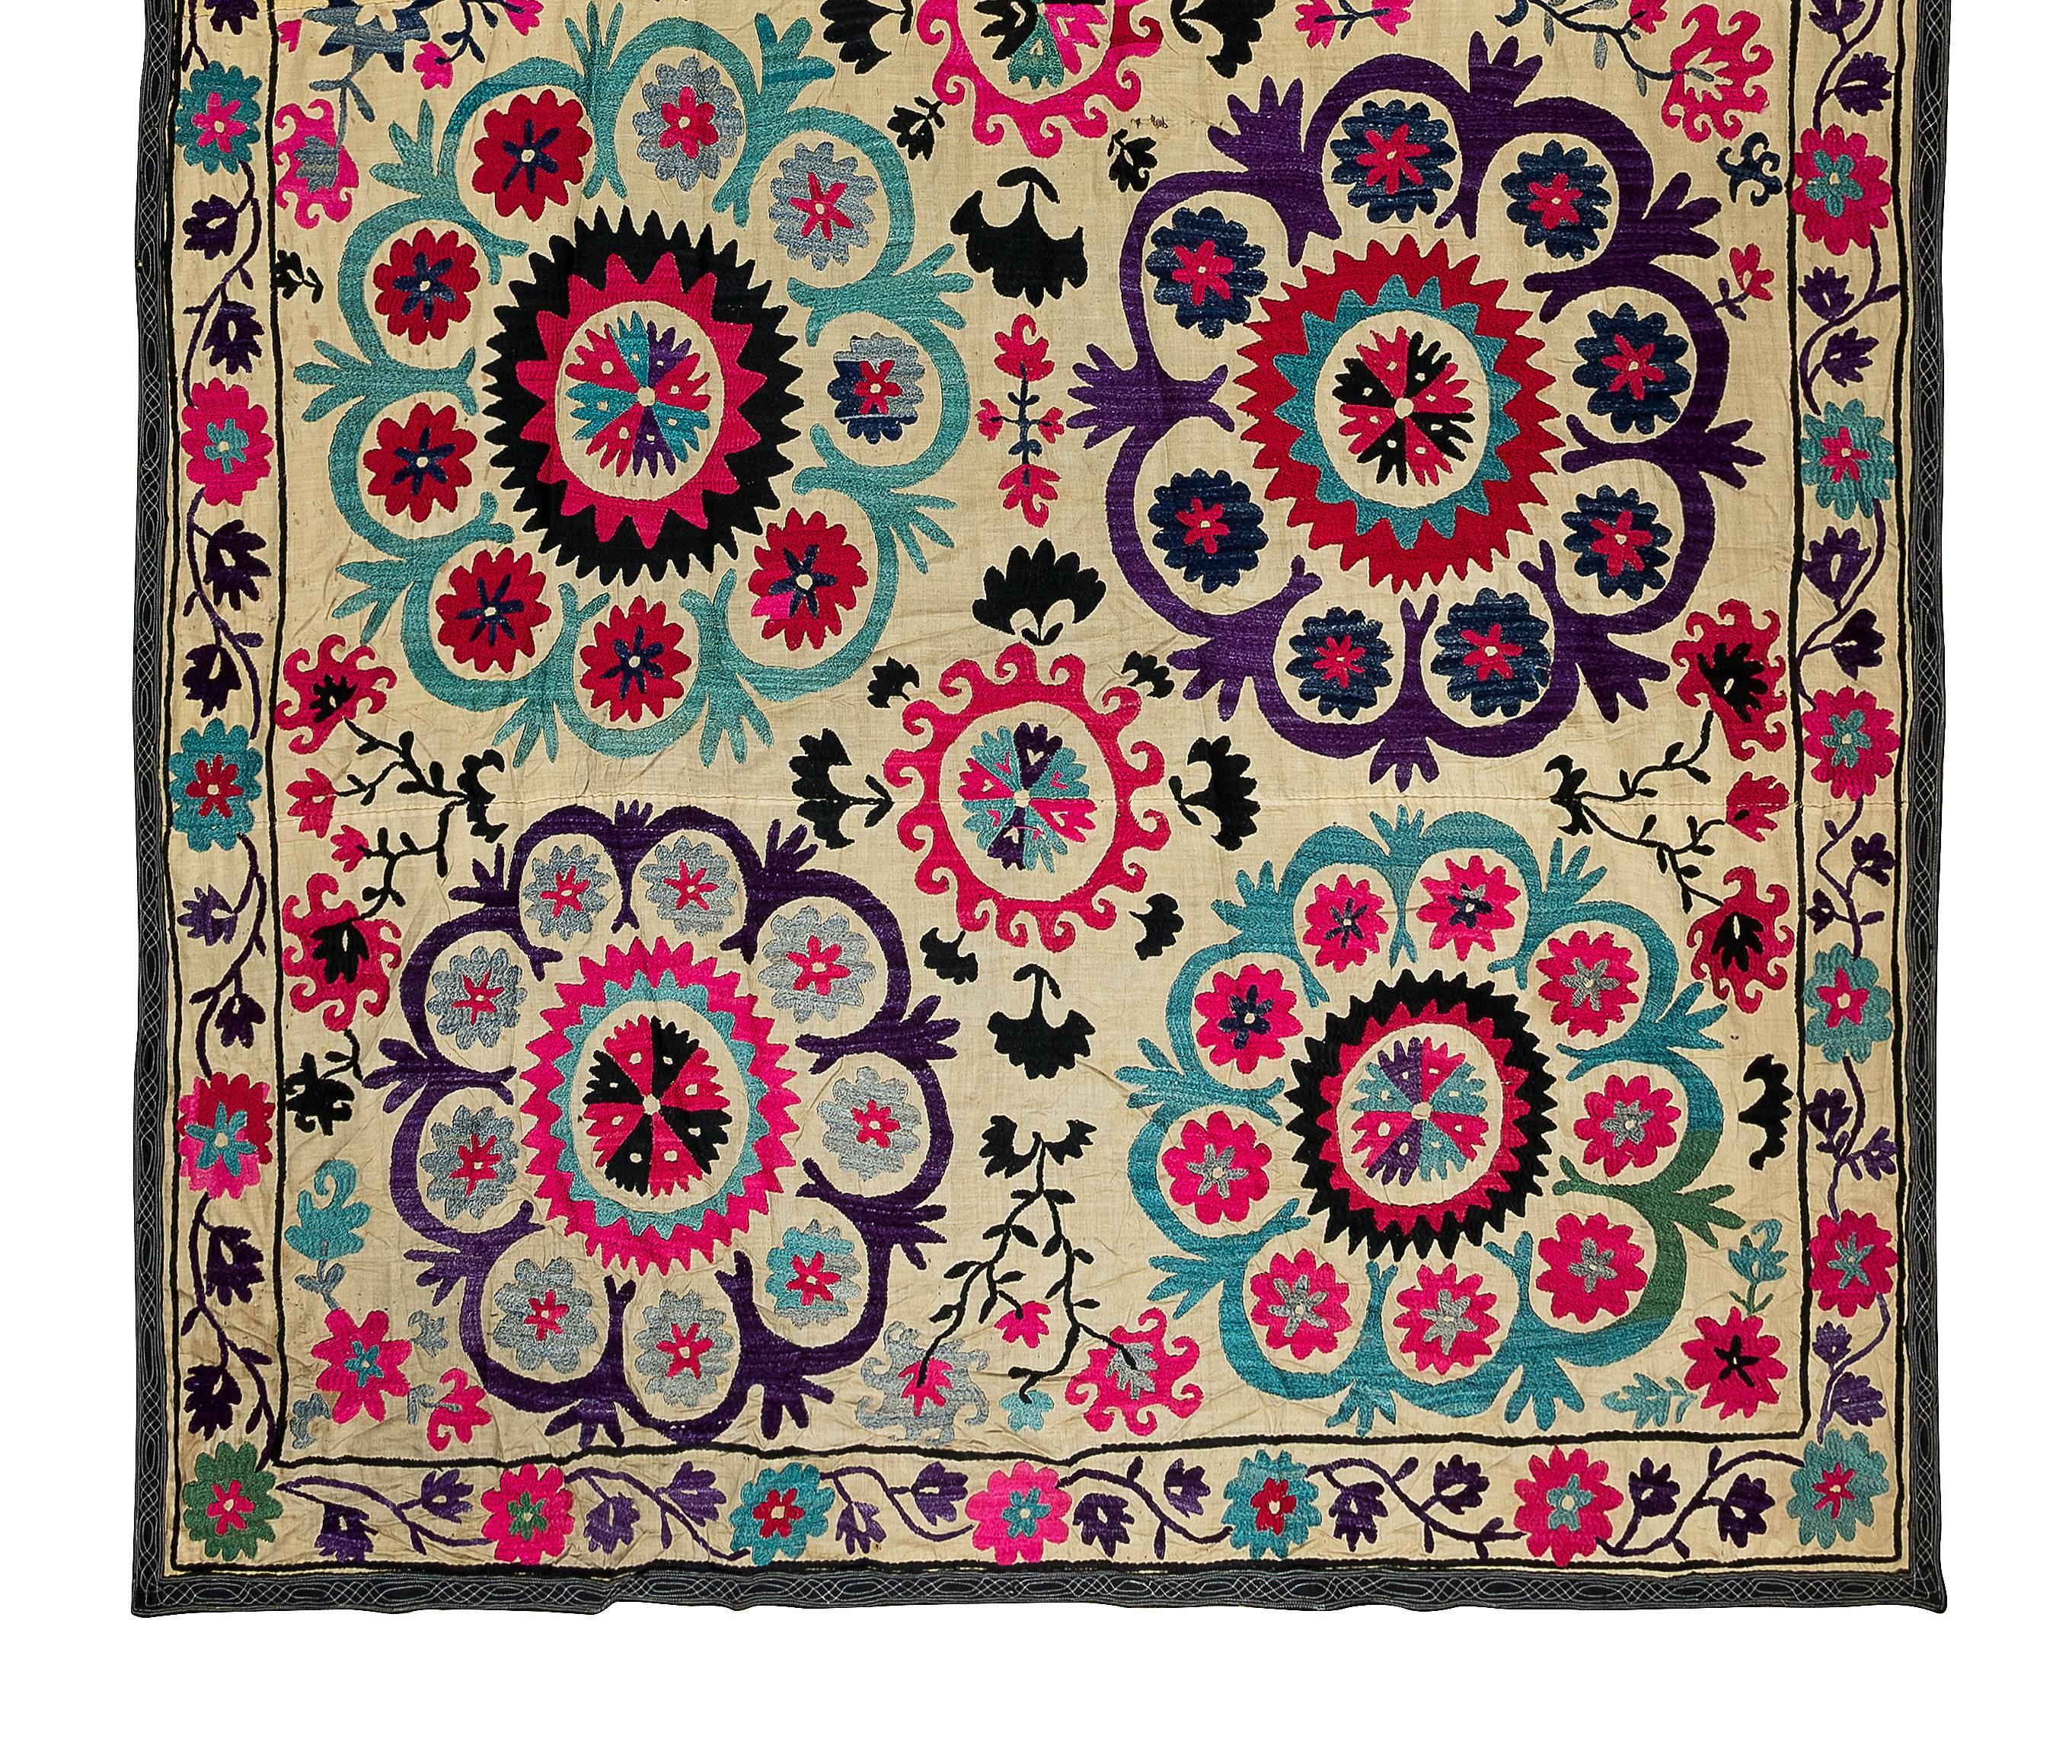 Embroidered 6x9.6 Ft Silk Embroidery Throw, Floral 1970s Suzani Tapestry, Uzbek Wall Hanging For Sale